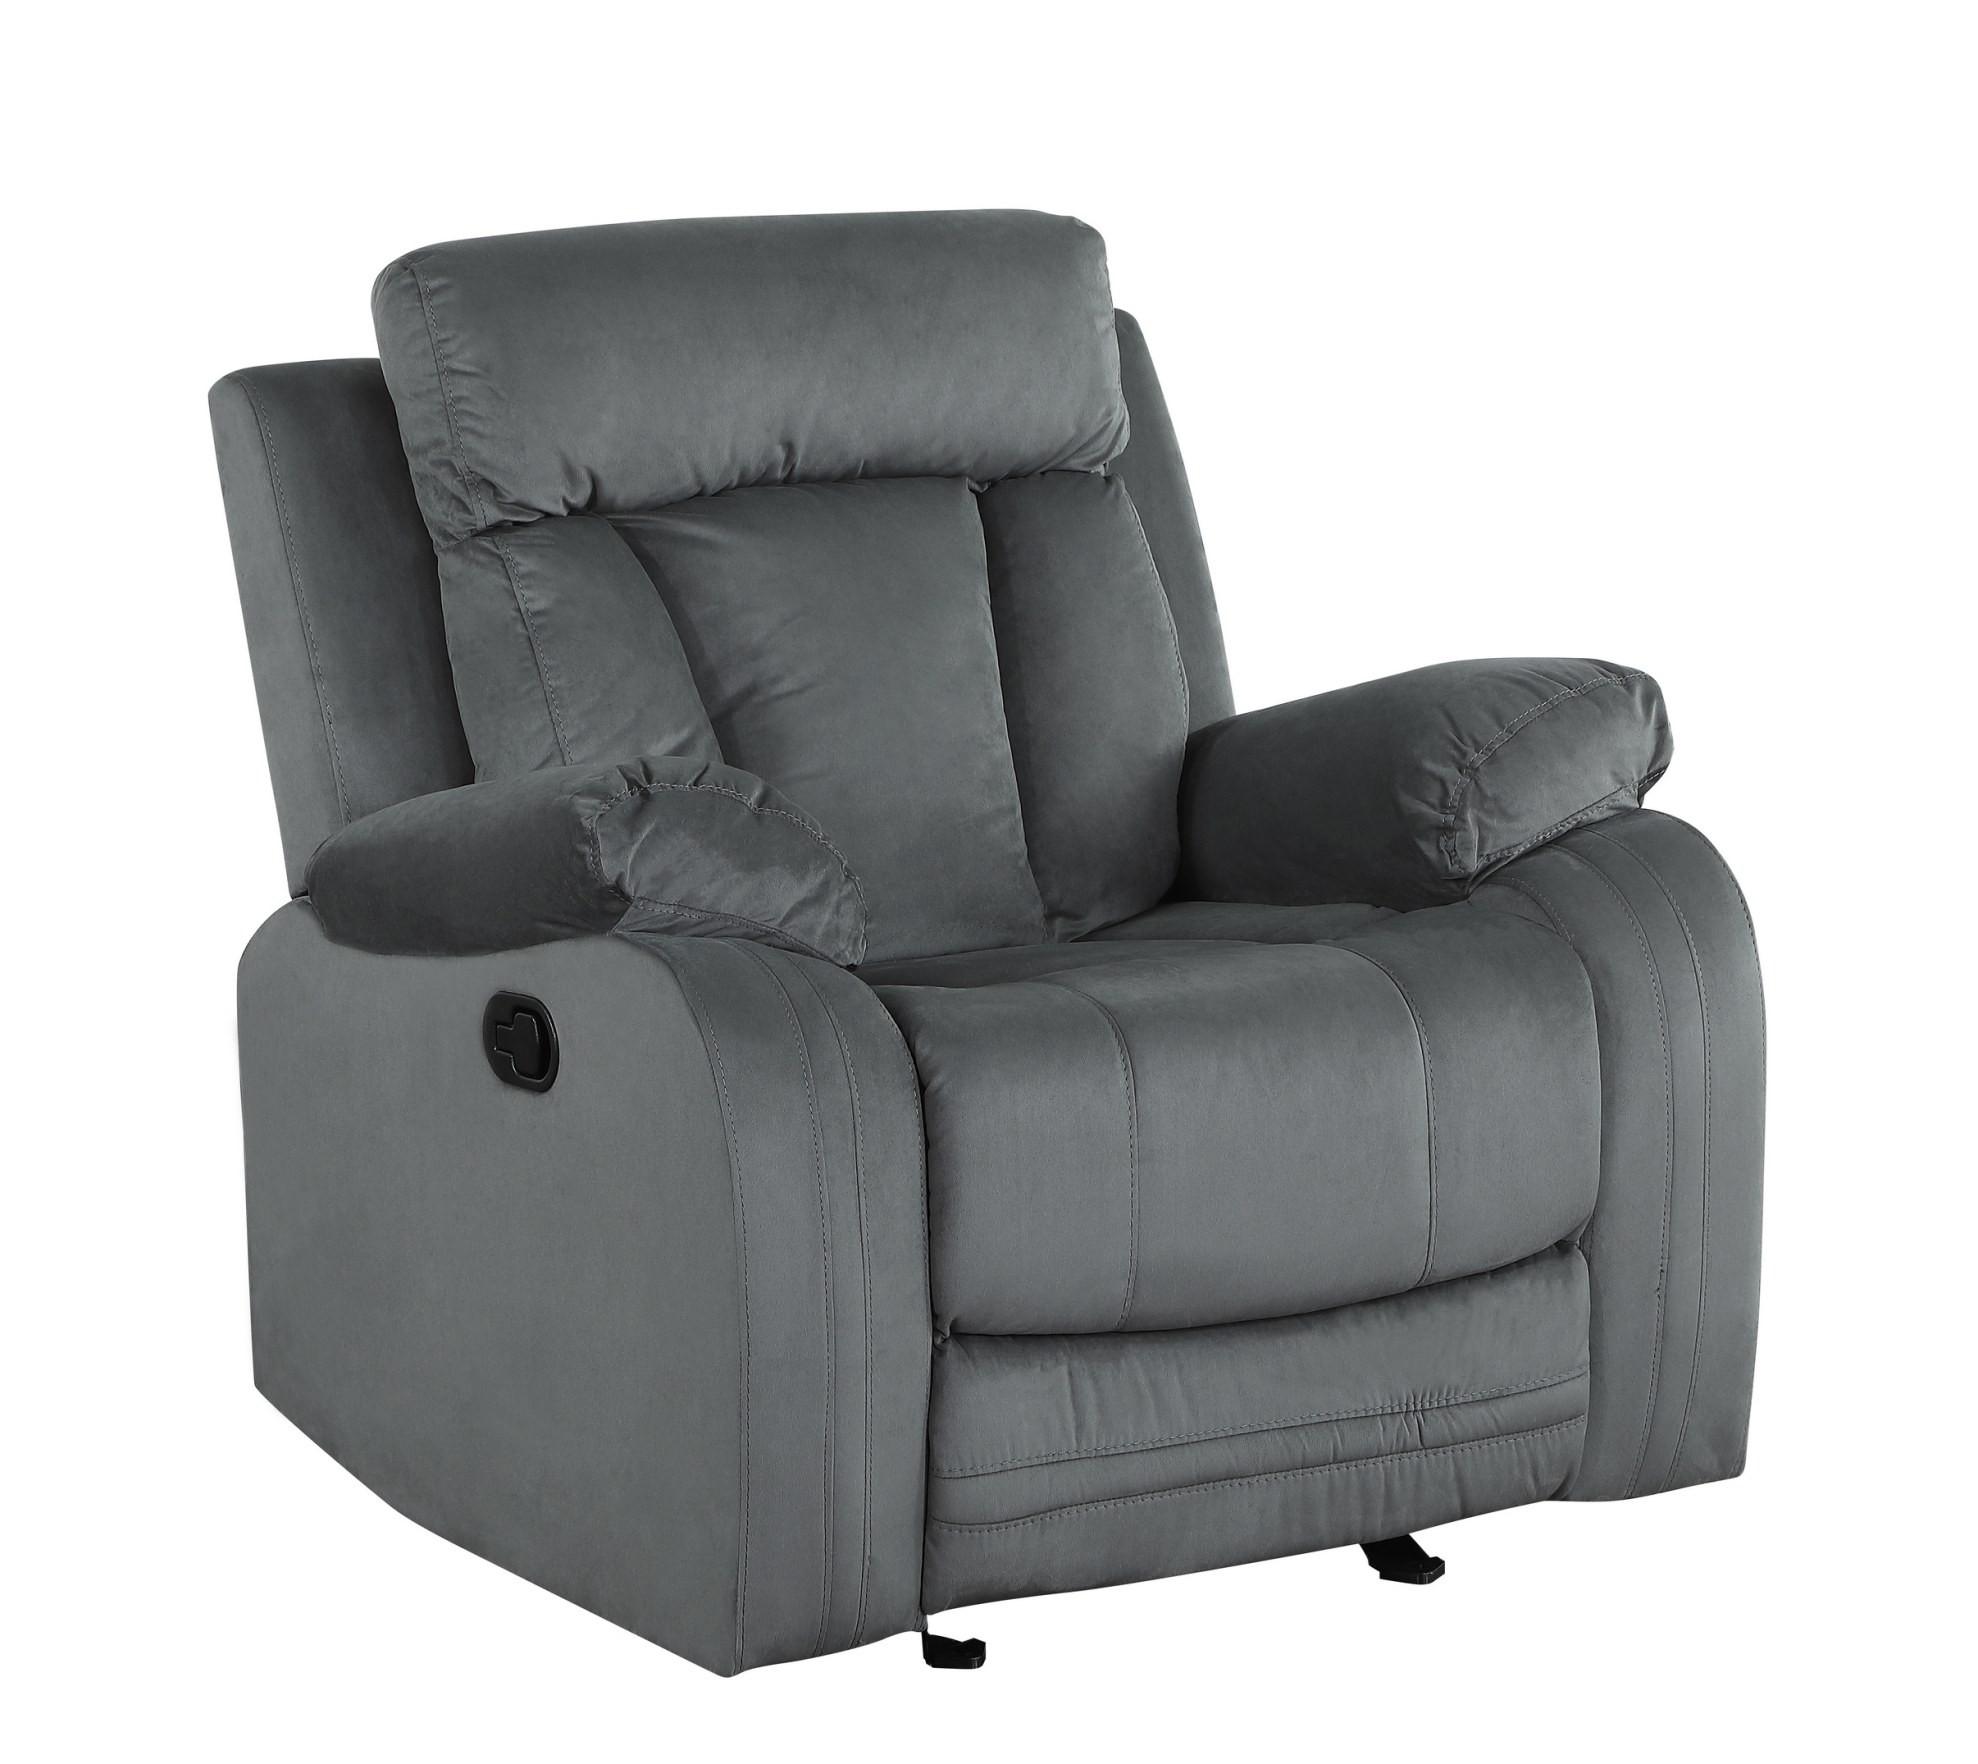 Contemporary Recliner Chair 9760 9760-GRAY-CH in Gray Microfiber